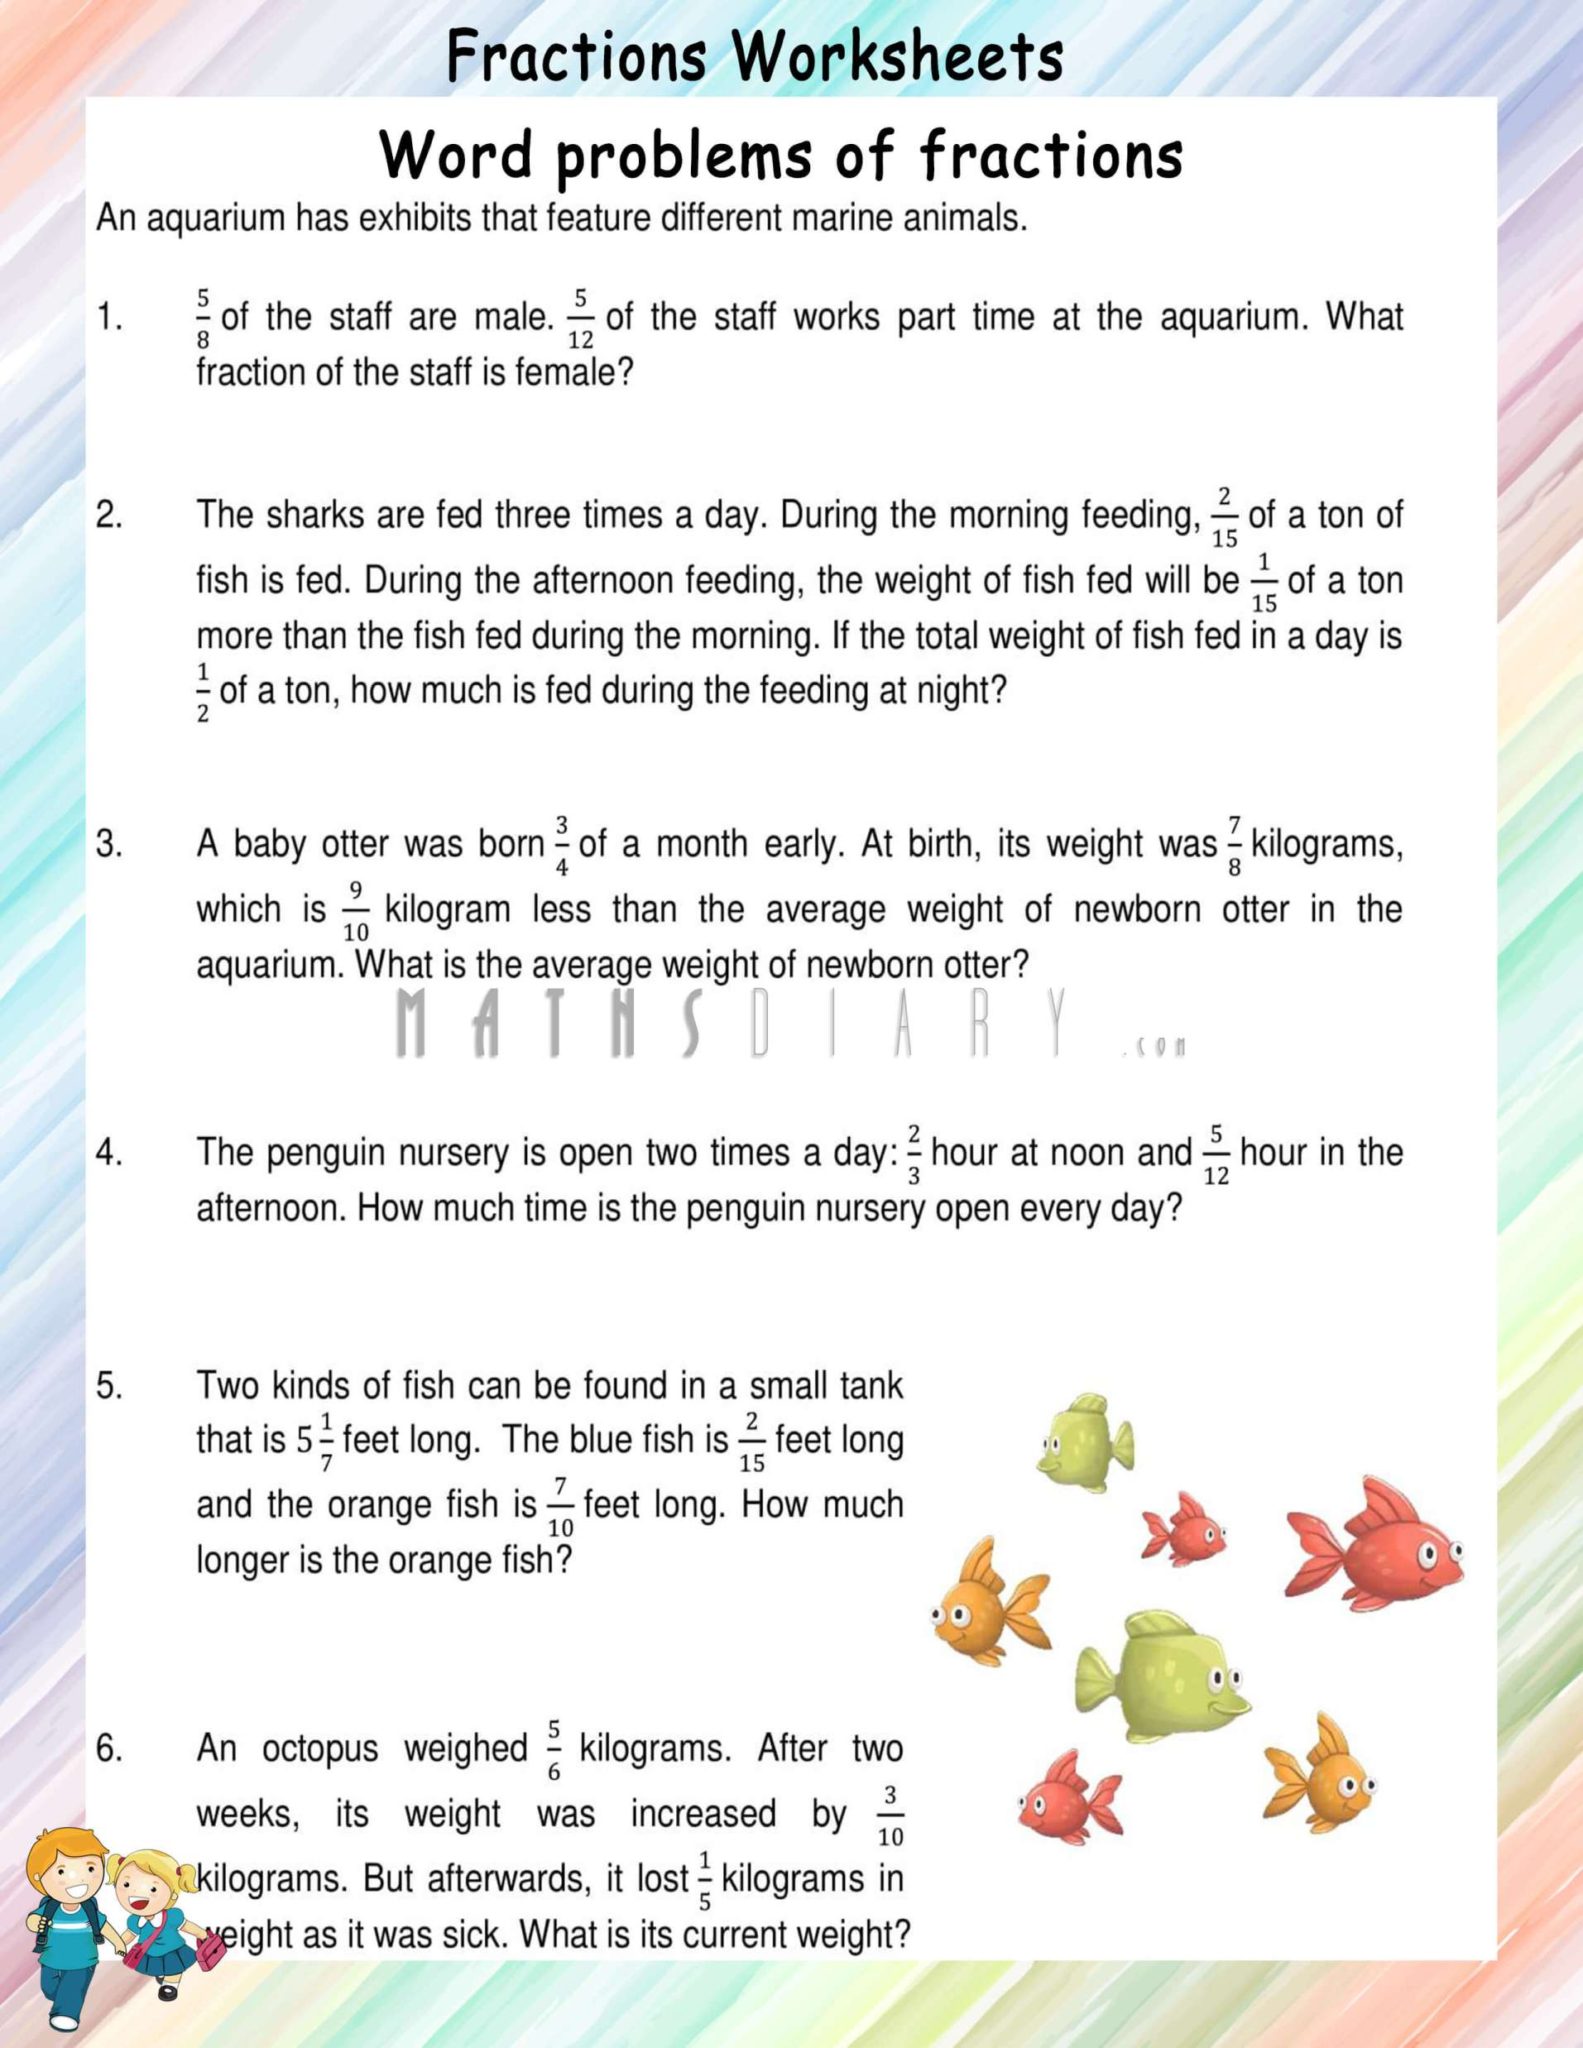 Word Problems of fractions worksheets Math Worksheets MathsDiary com